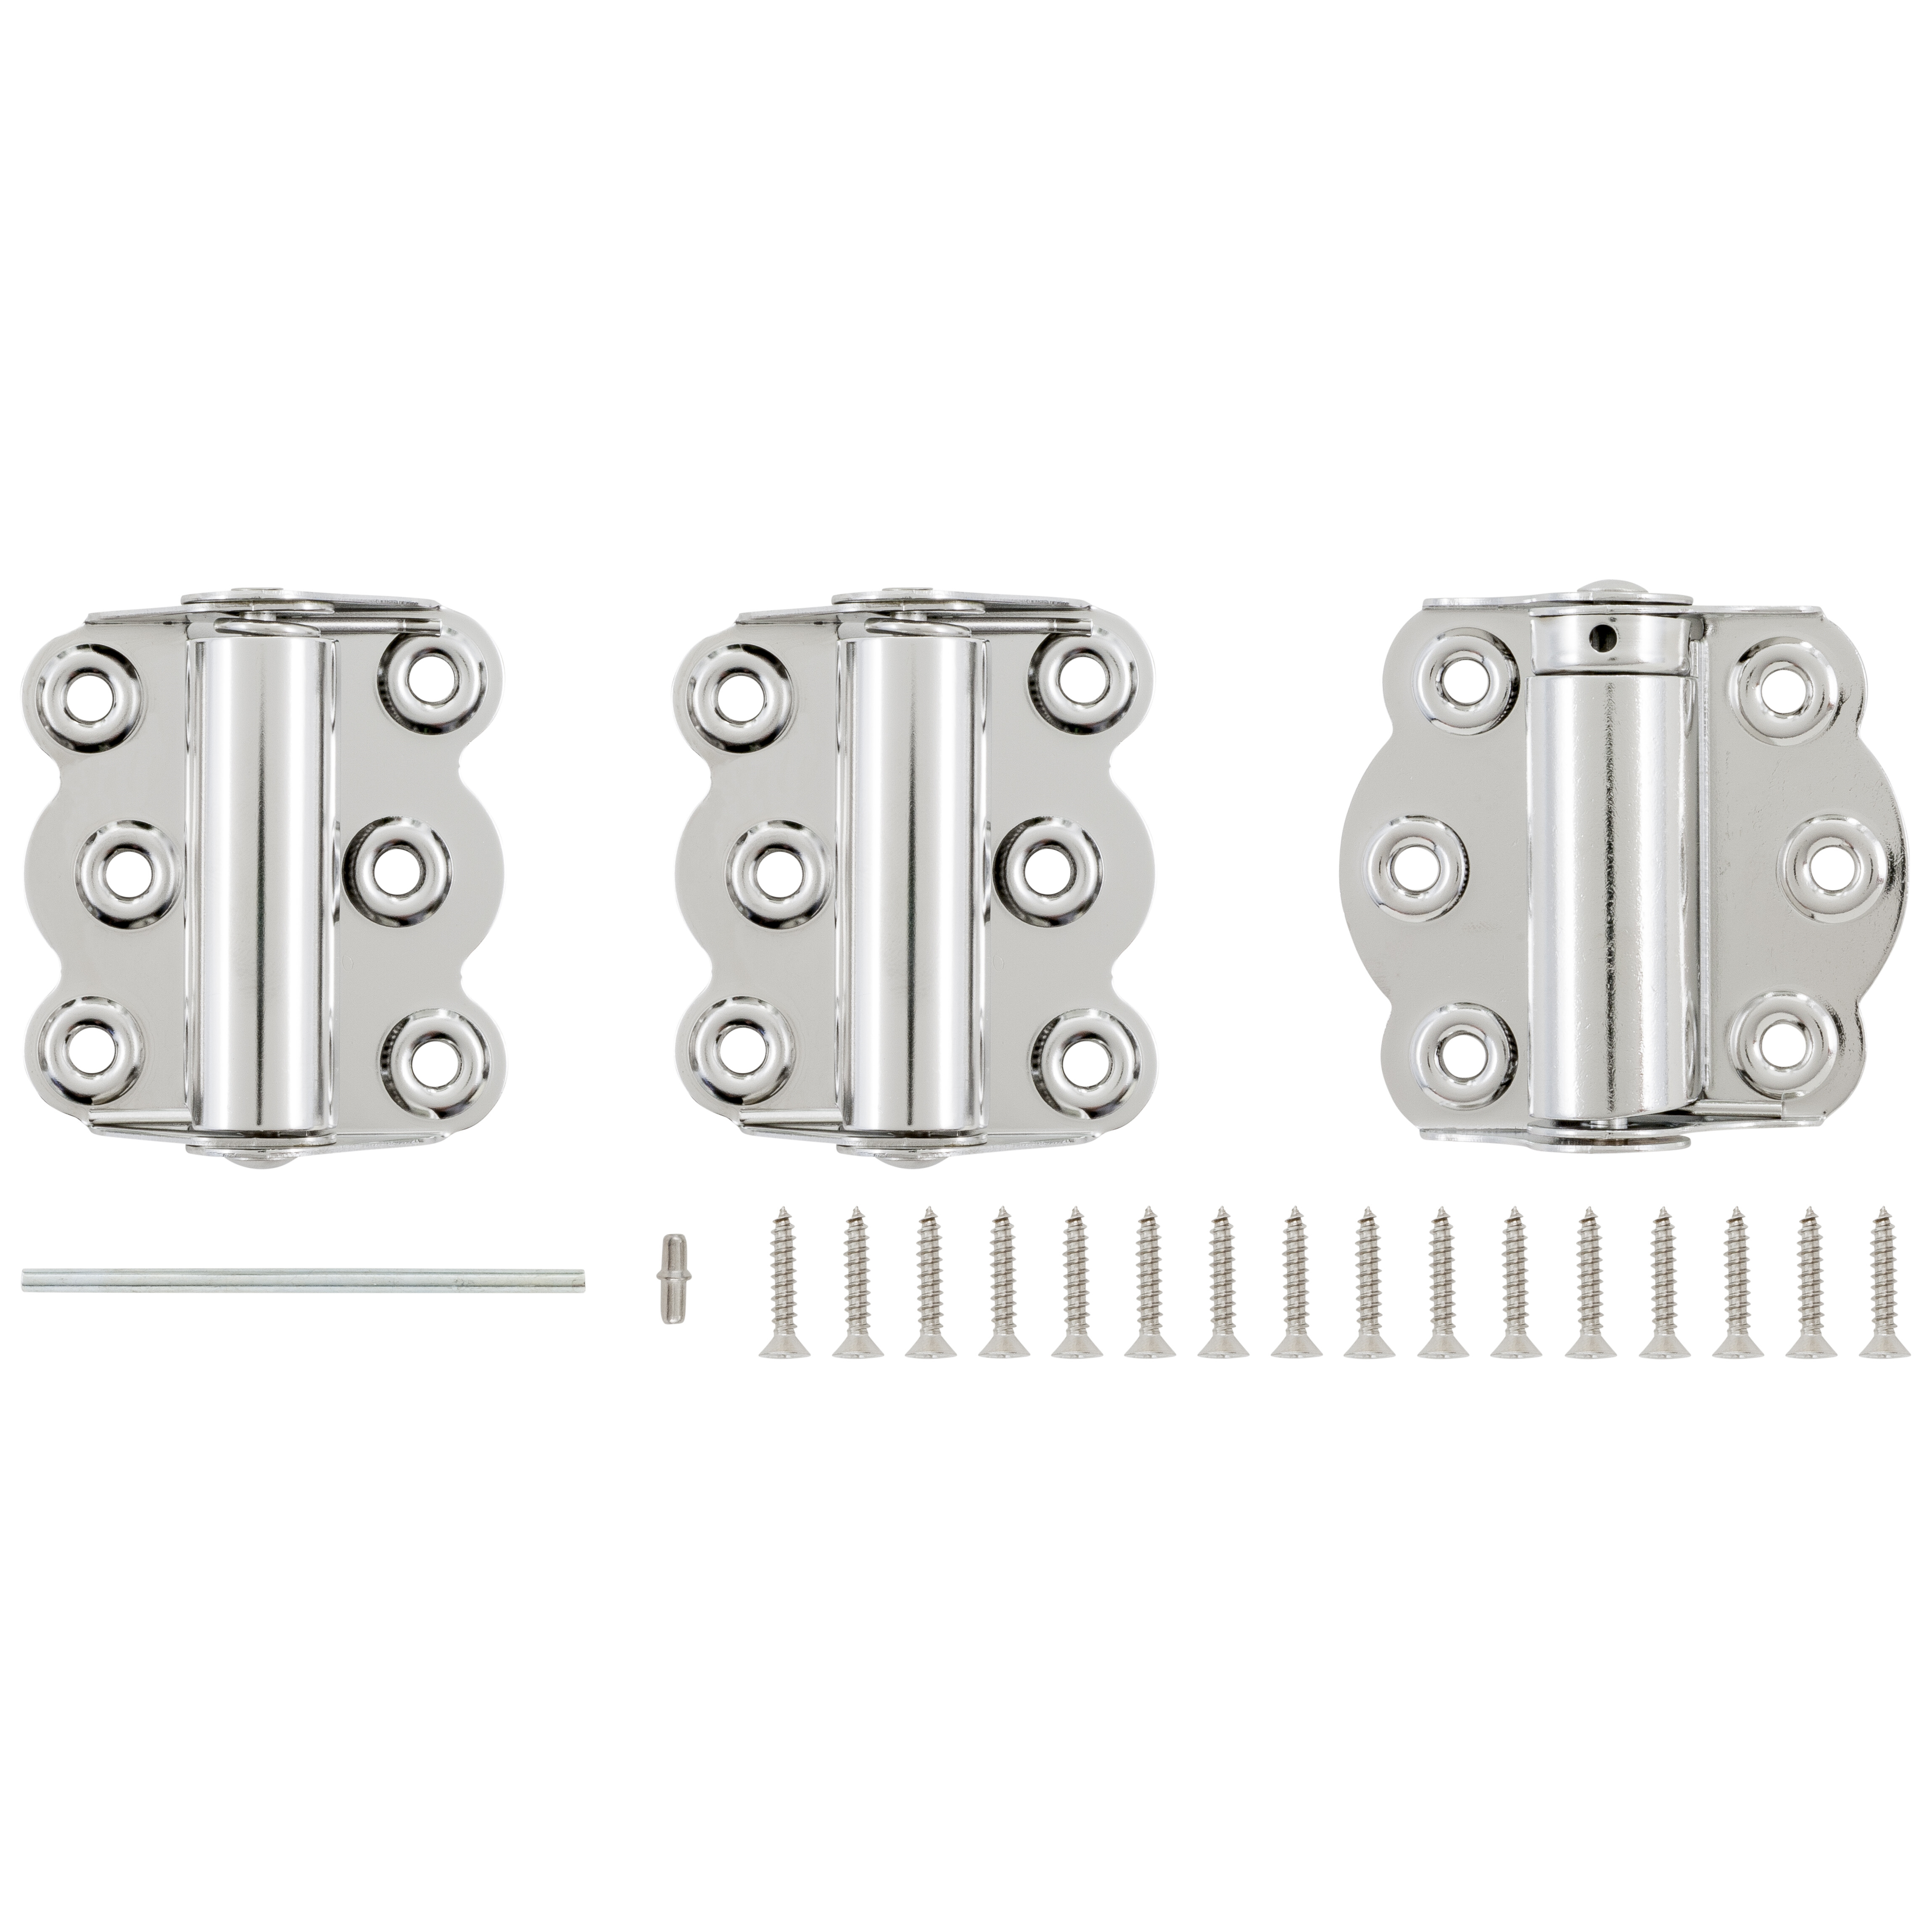 Stainless Steel Self-Closing Adjustable Hinge Wright Products 2-3/4 in 3-Pack 